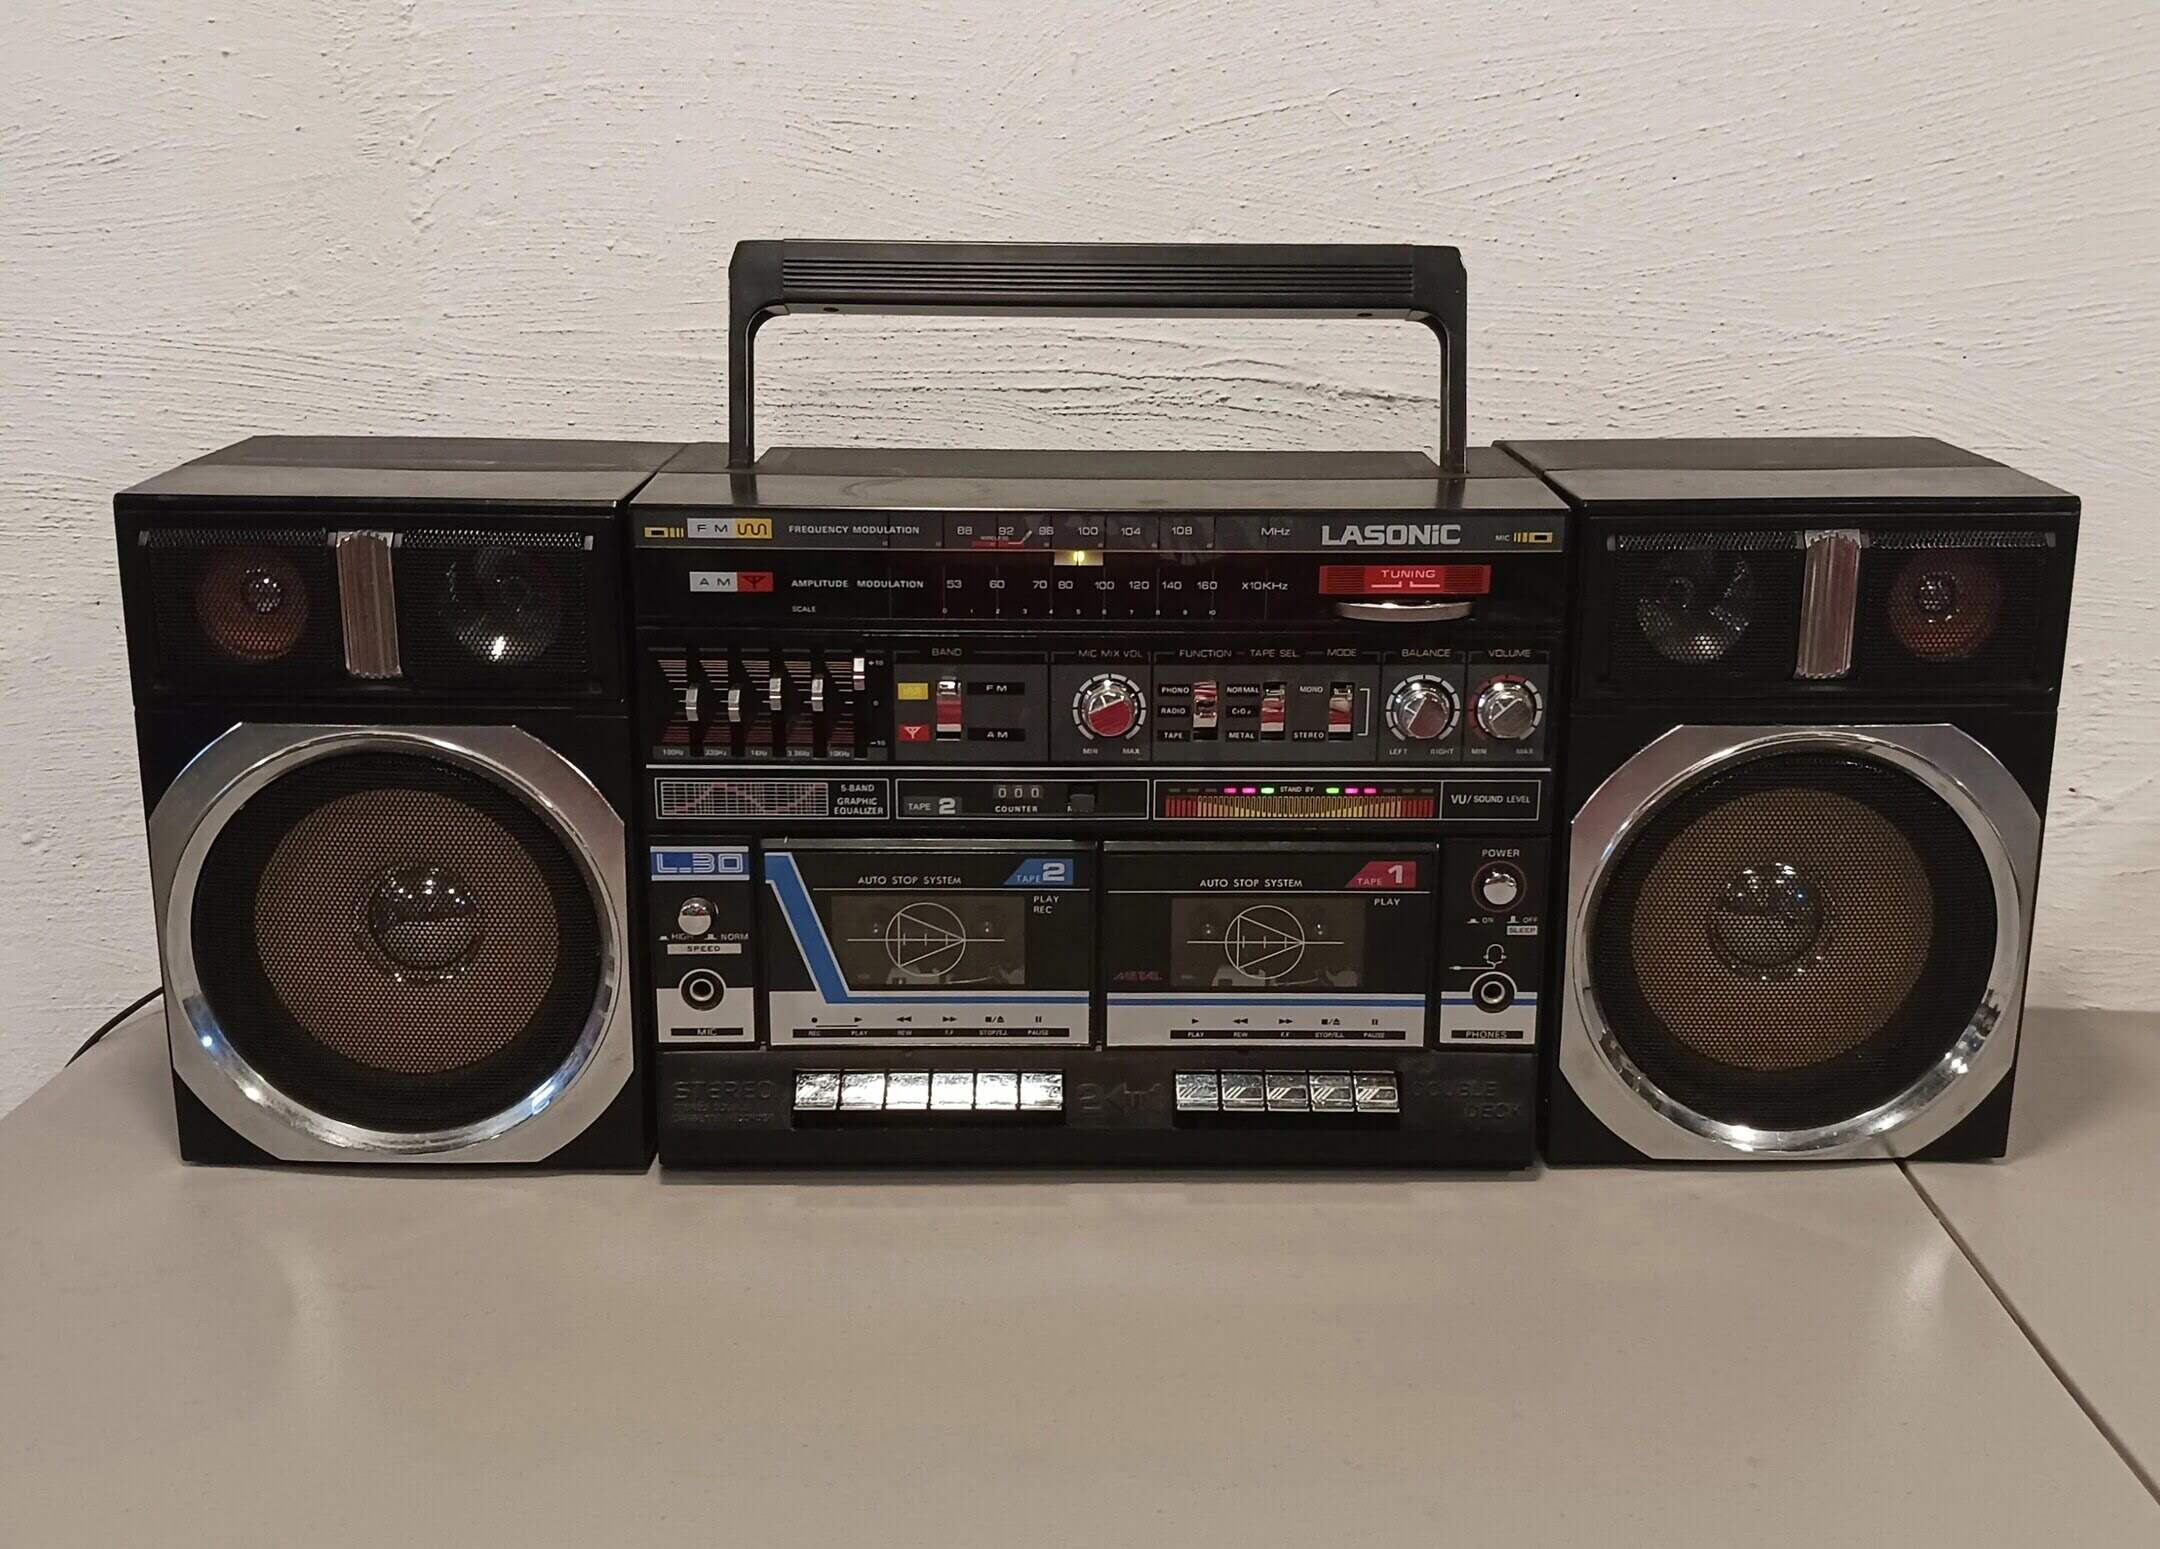 The Monster, The ultimate boom box – TechPlay